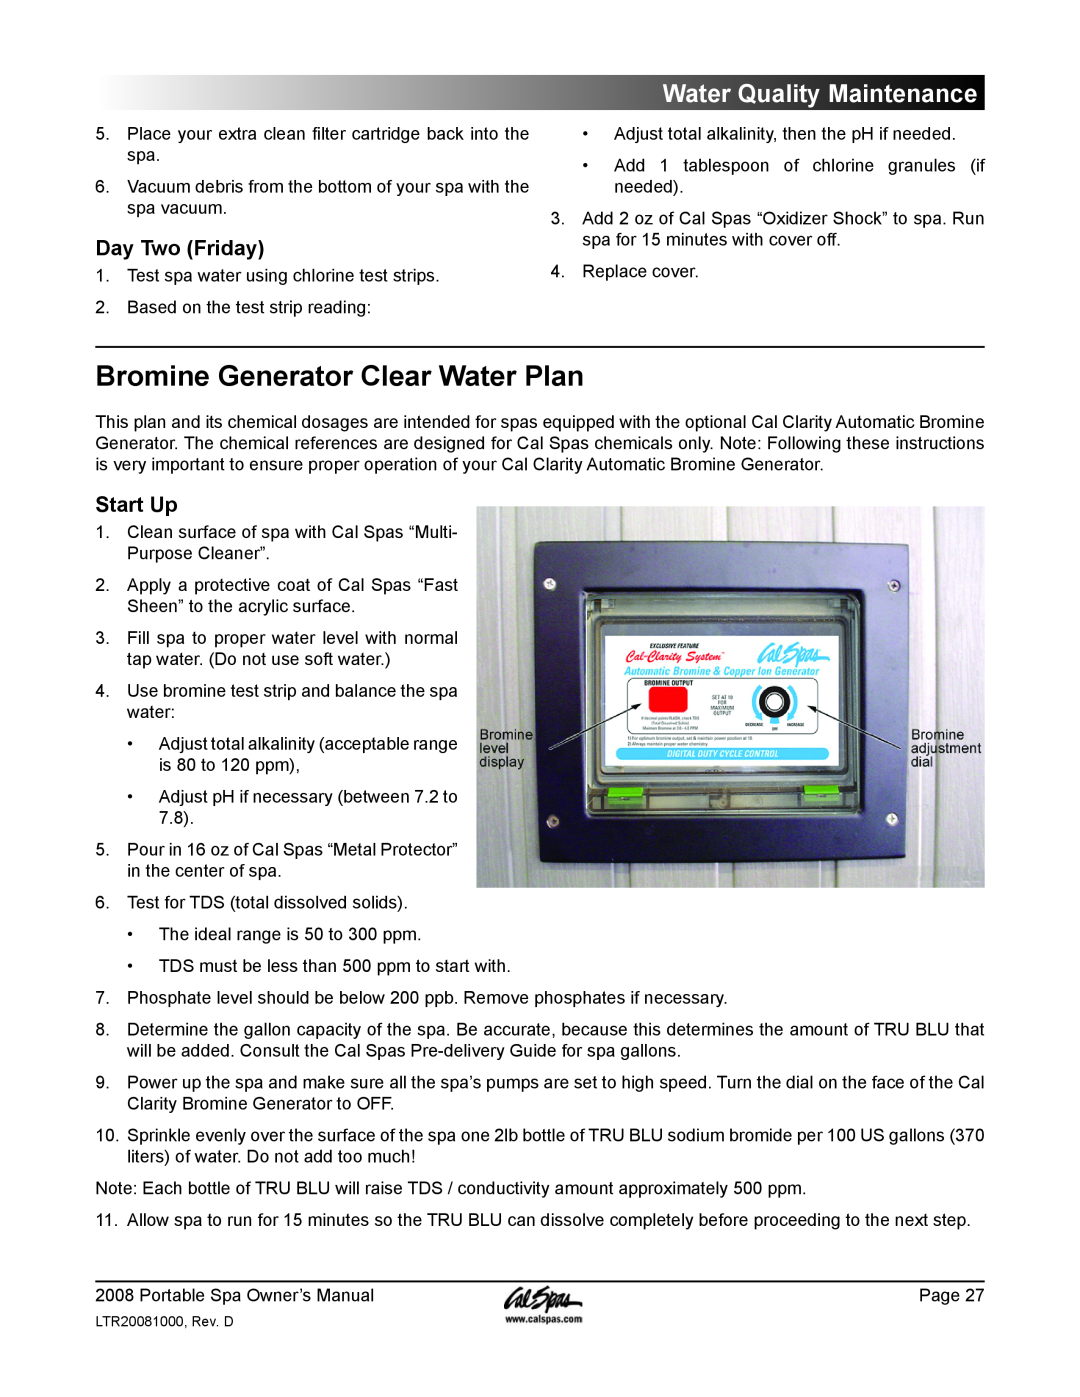 Cal Spas GFCI manual Bromine Generator Clear Water Plan, Day Two Friday, Water Quality Maintenance, Start Up 